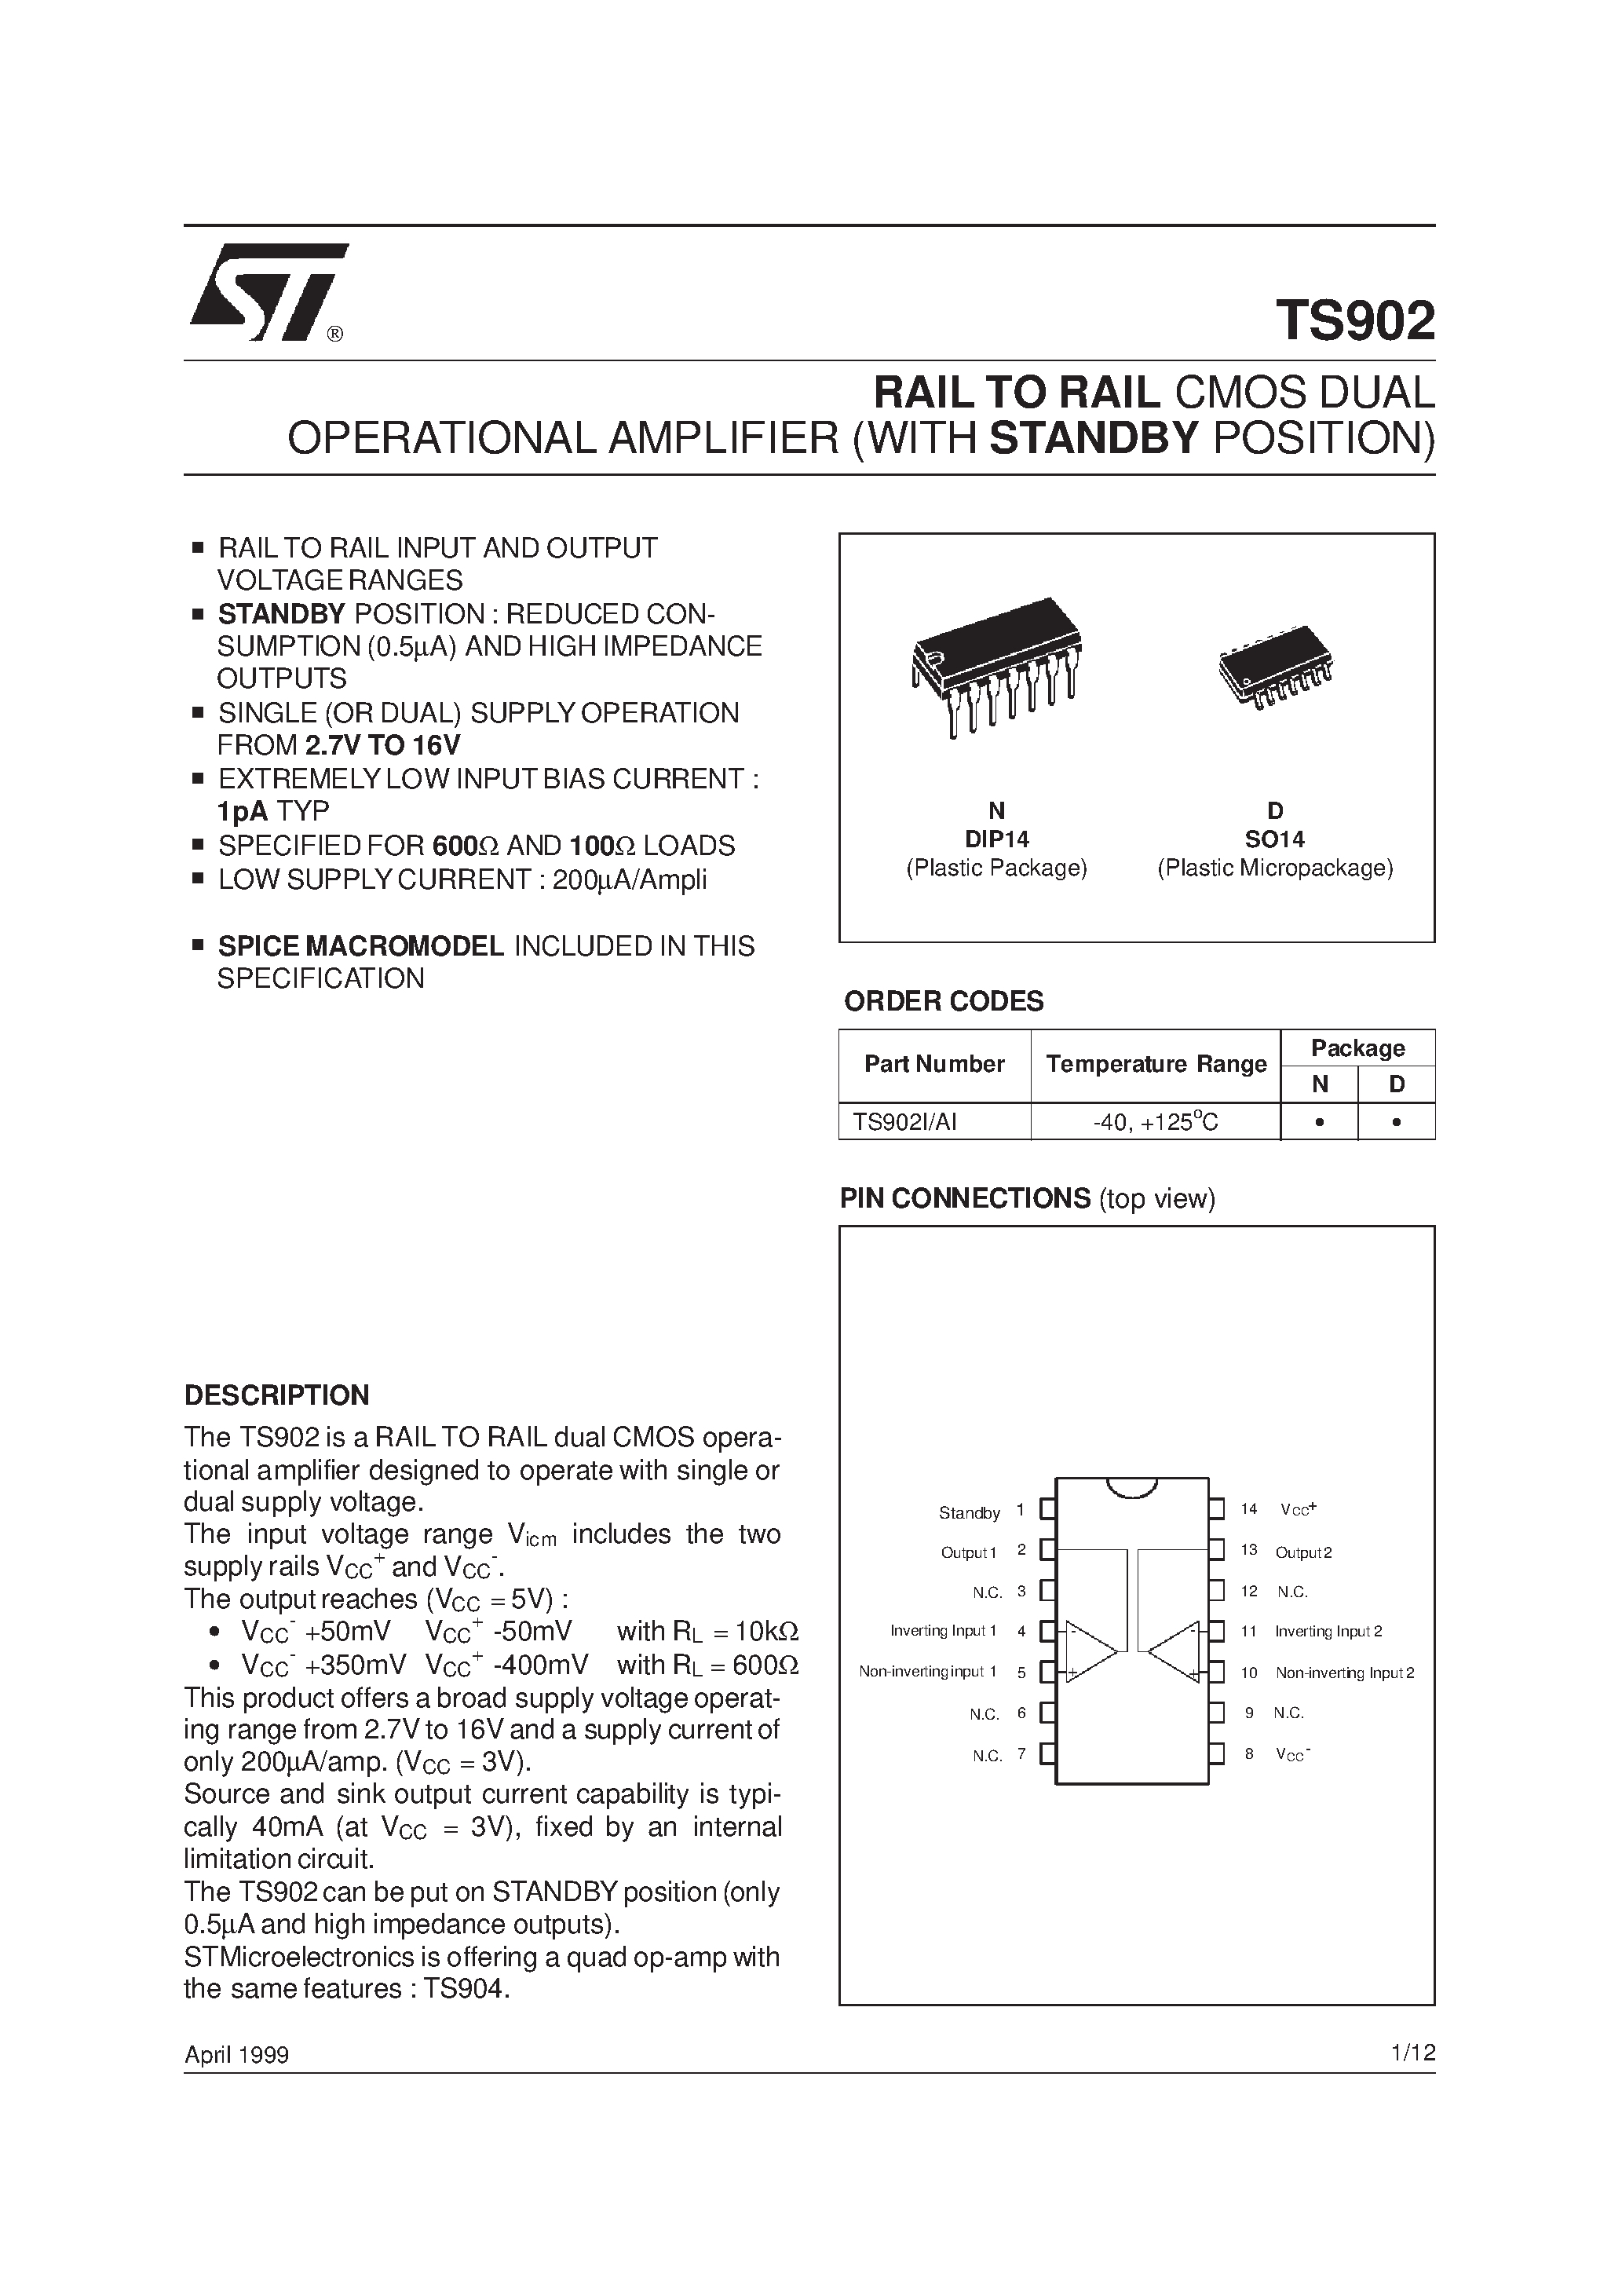 Даташит TS902 - RAIL TO RAIL CMOS DUAL OPERATIONAL AMPLIFIER WITH STANDBY POSITION страница 1